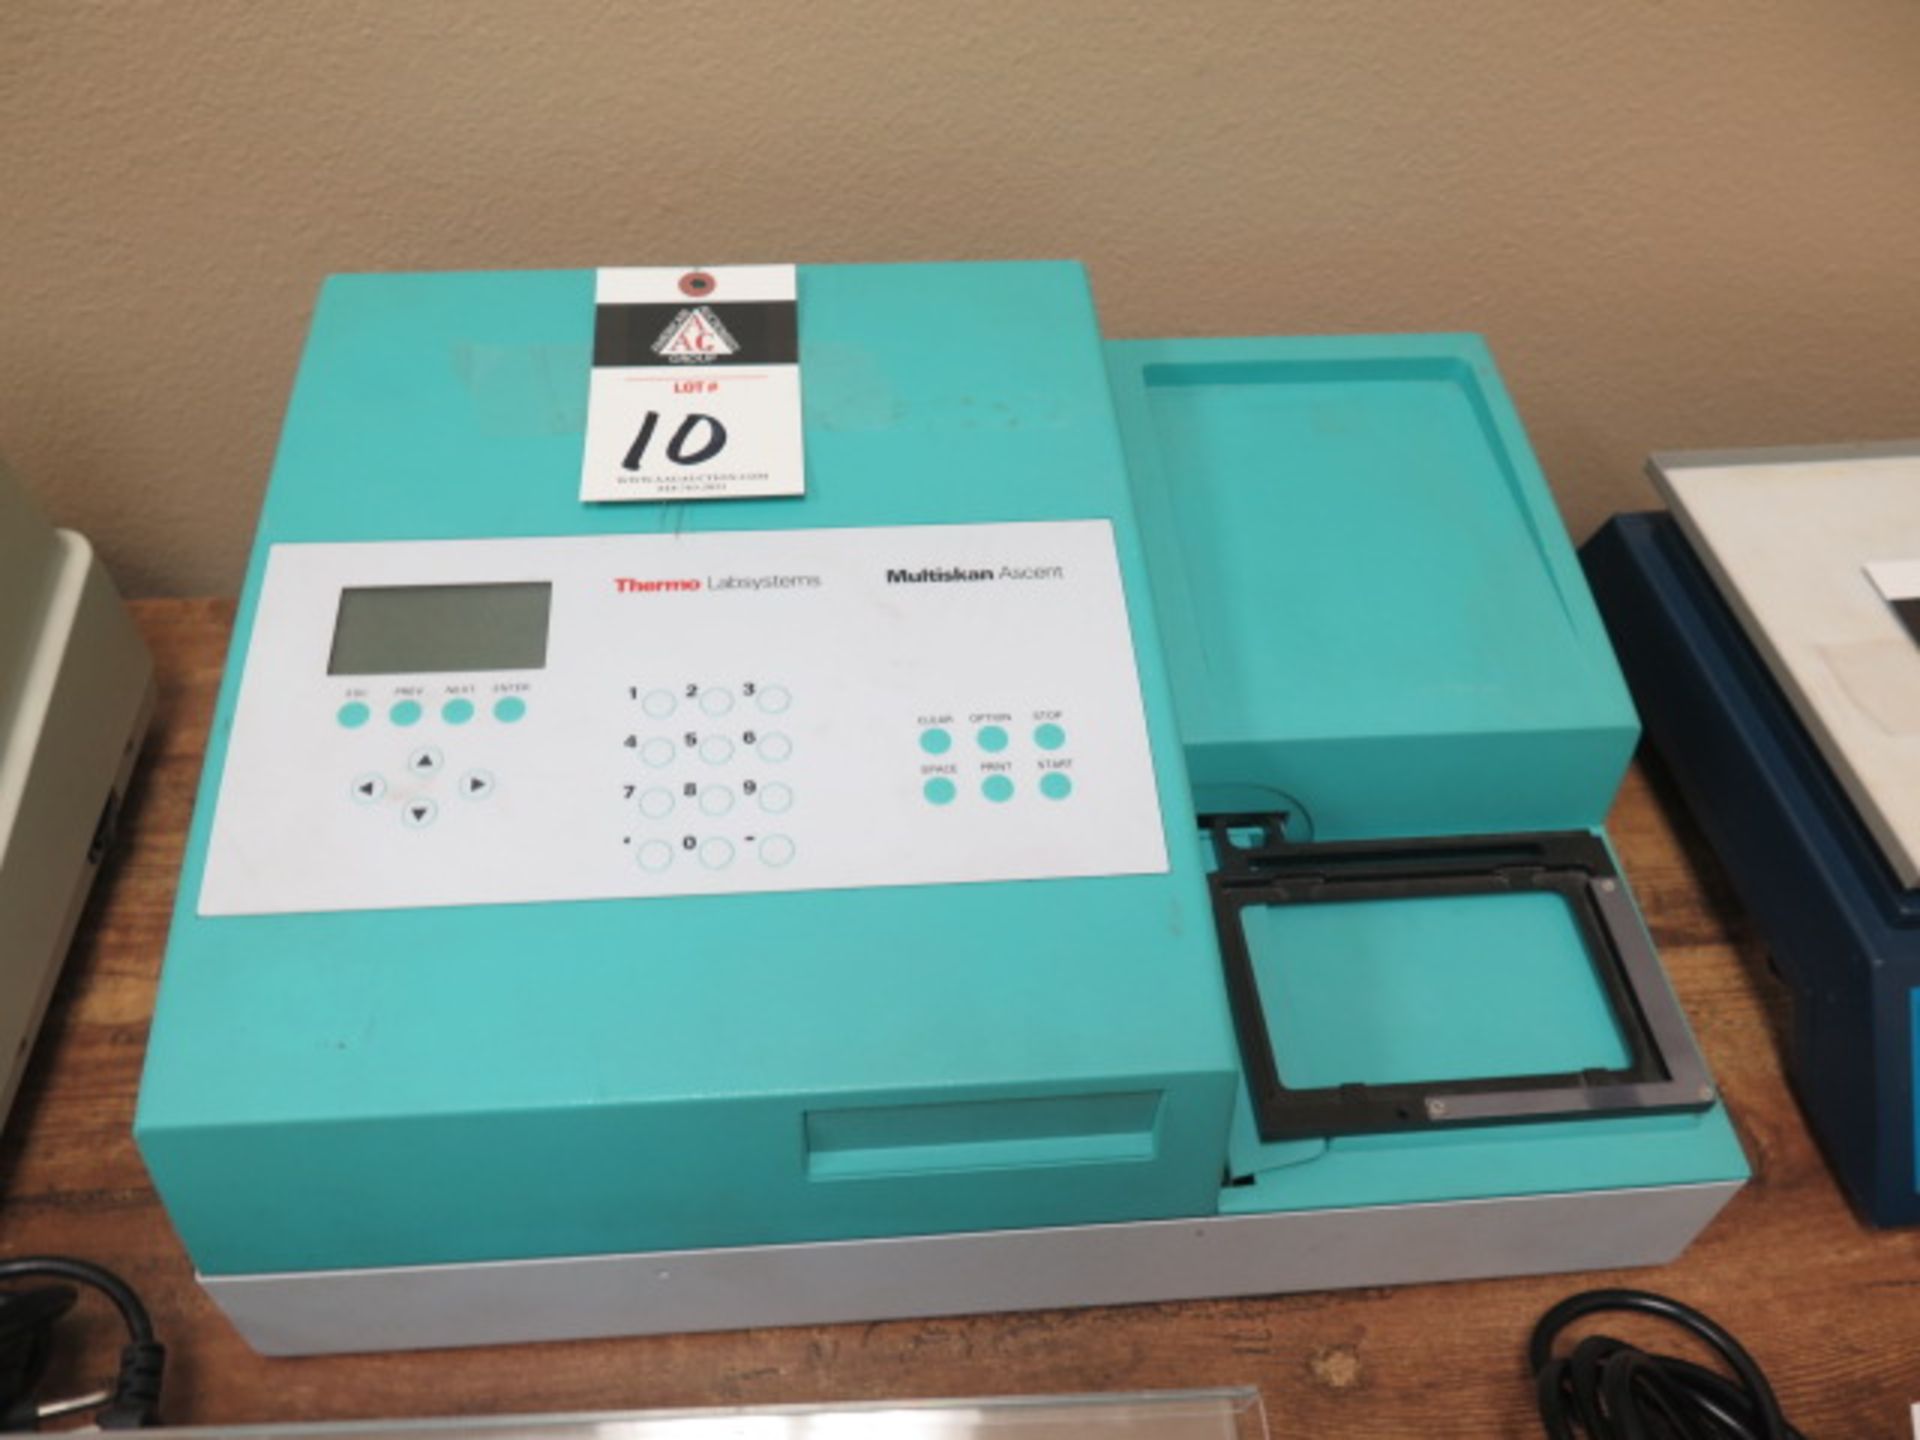 Thermo Lab Systems Mulitskan Ascent mdl. 354 Microplate Reader (SOLD AS-IS - NO WARRANTY)